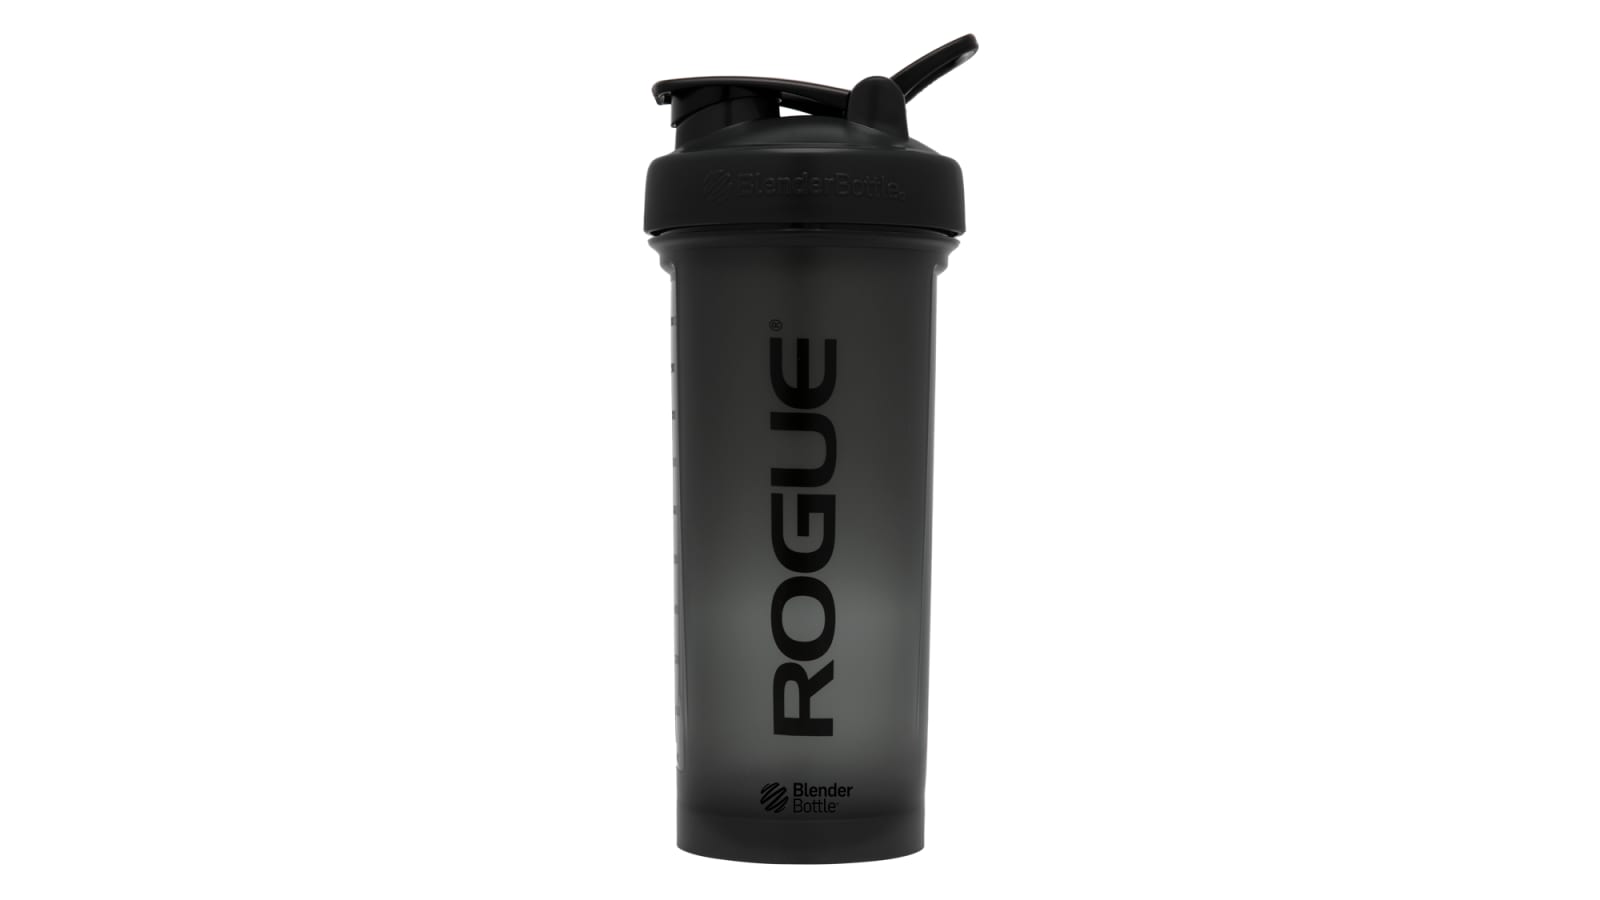 https://assets.roguefitness.com/f_auto,q_auto,c_limit,w_1600,b_rgb:ffffff/catalog/Gear%20and%20Accessories/Accessories/Shakers%20and%20Bottles/BB0027/BB0044-New-Version/BB0044-H_plj9uv.png